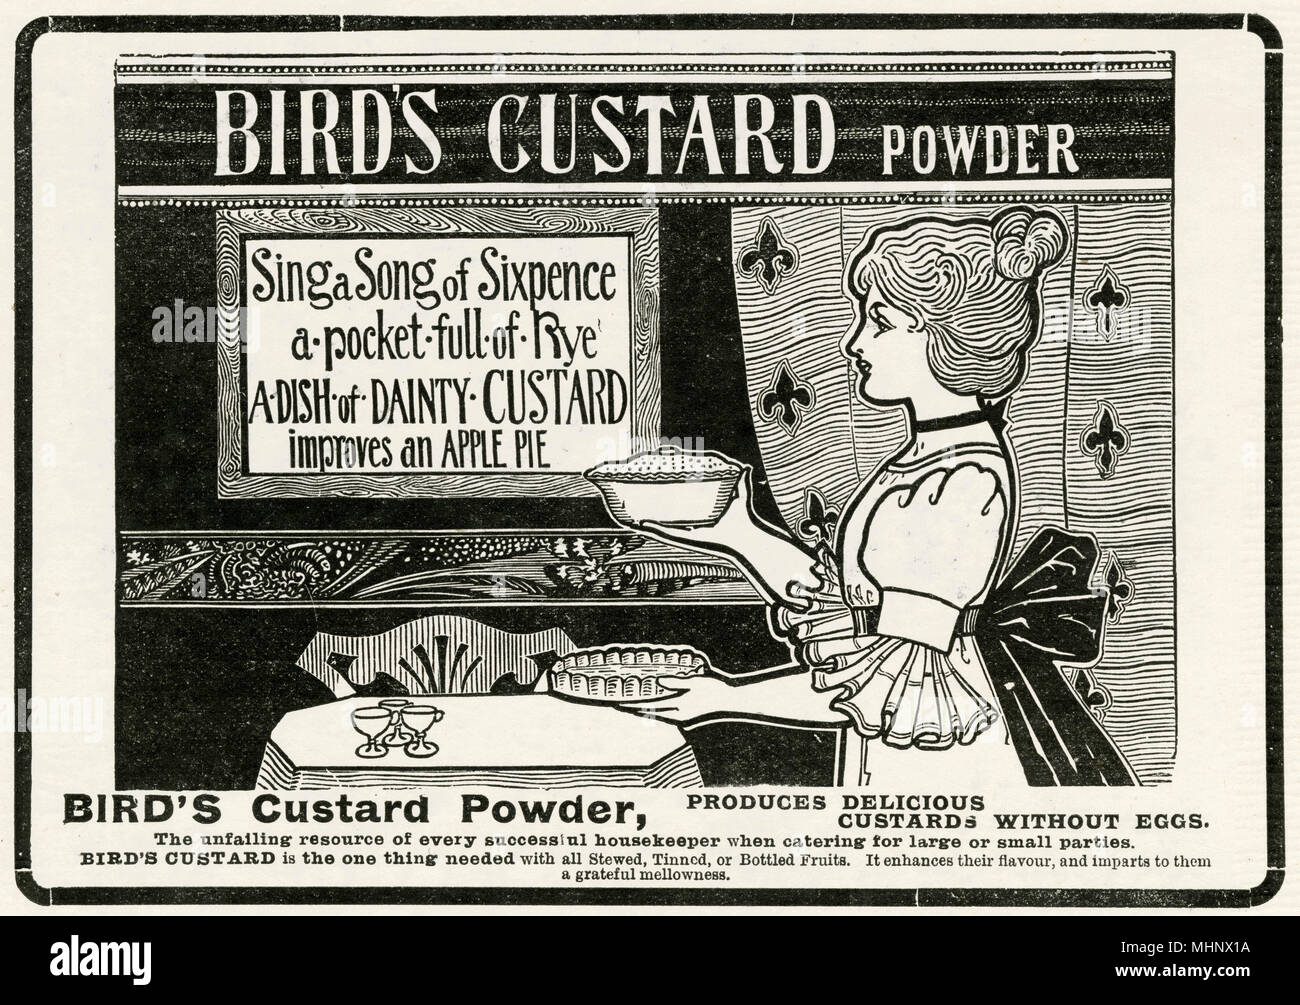 'Sing a song of sixpence a pocket full of rye a dish of dainty CUSTARD improves an apple pie'. Advertisement for Bird's Custard Power, without eggs.     Date: 1905 Stock Photo